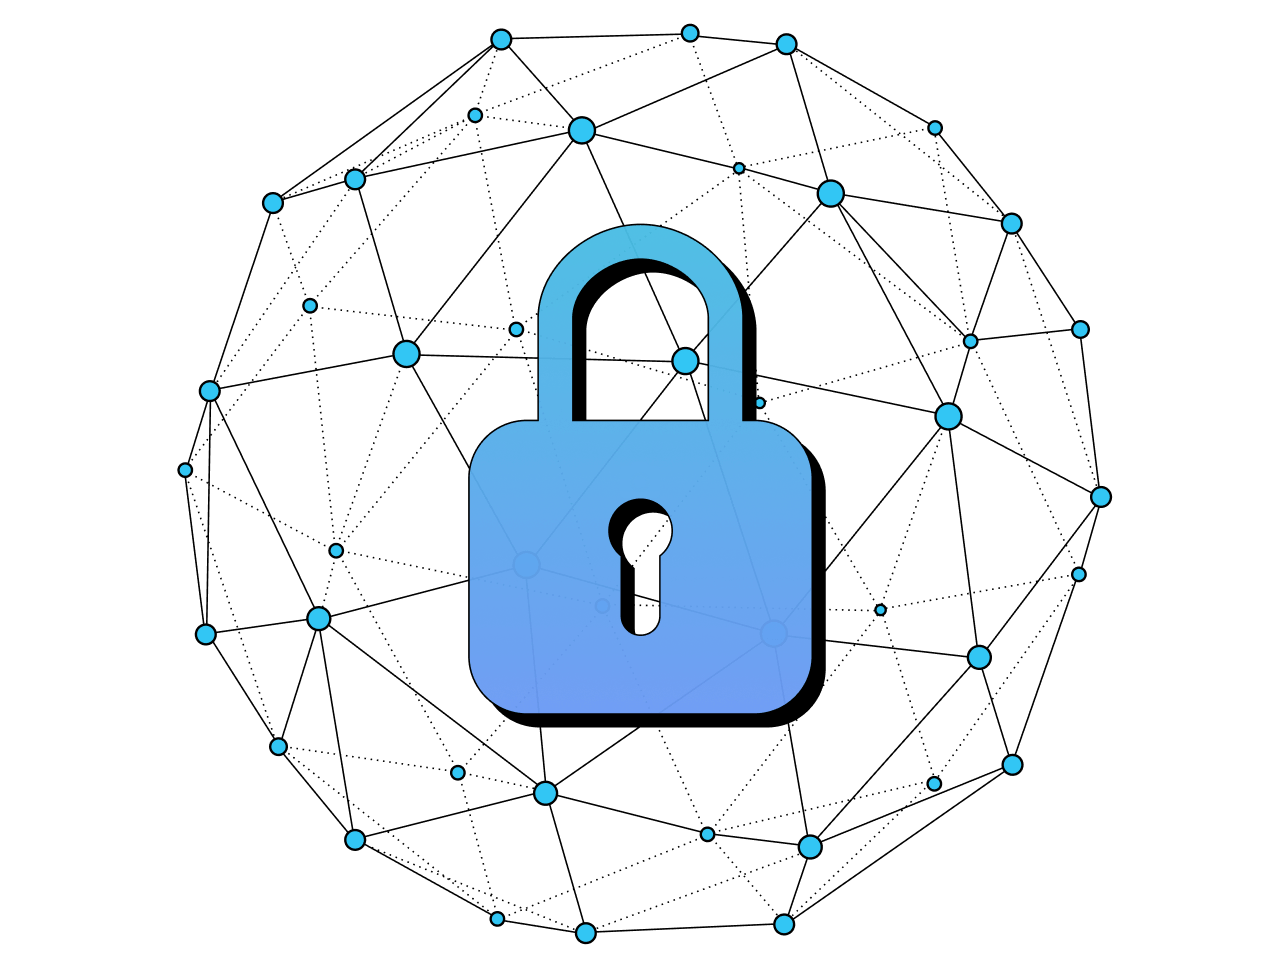 Enterprise Grade Security and Privacy | LivePerson